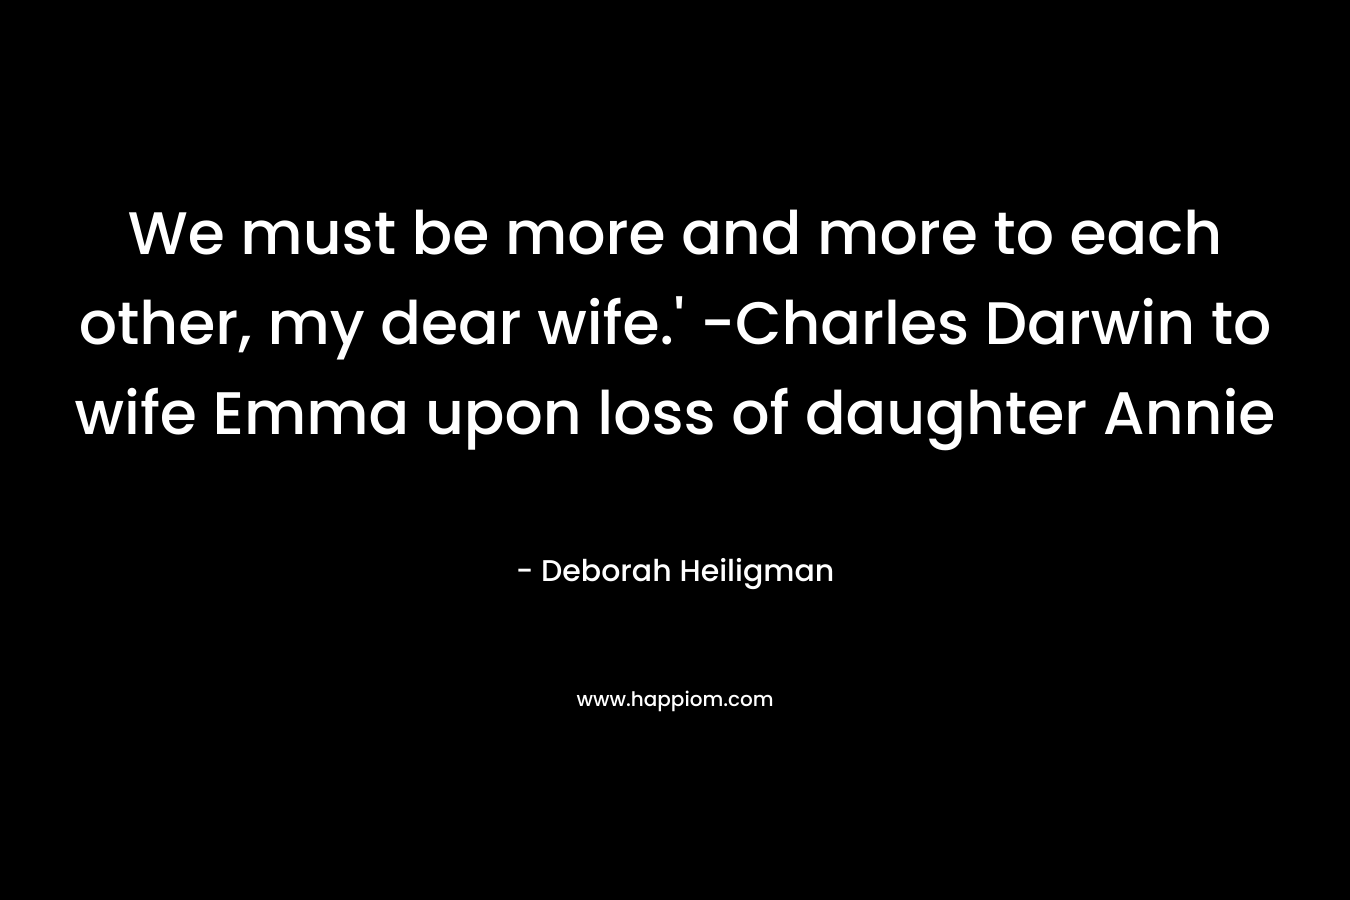 We must be more and more to each other, my dear wife.' -Charles Darwin to wife Emma upon loss of daughter Annie